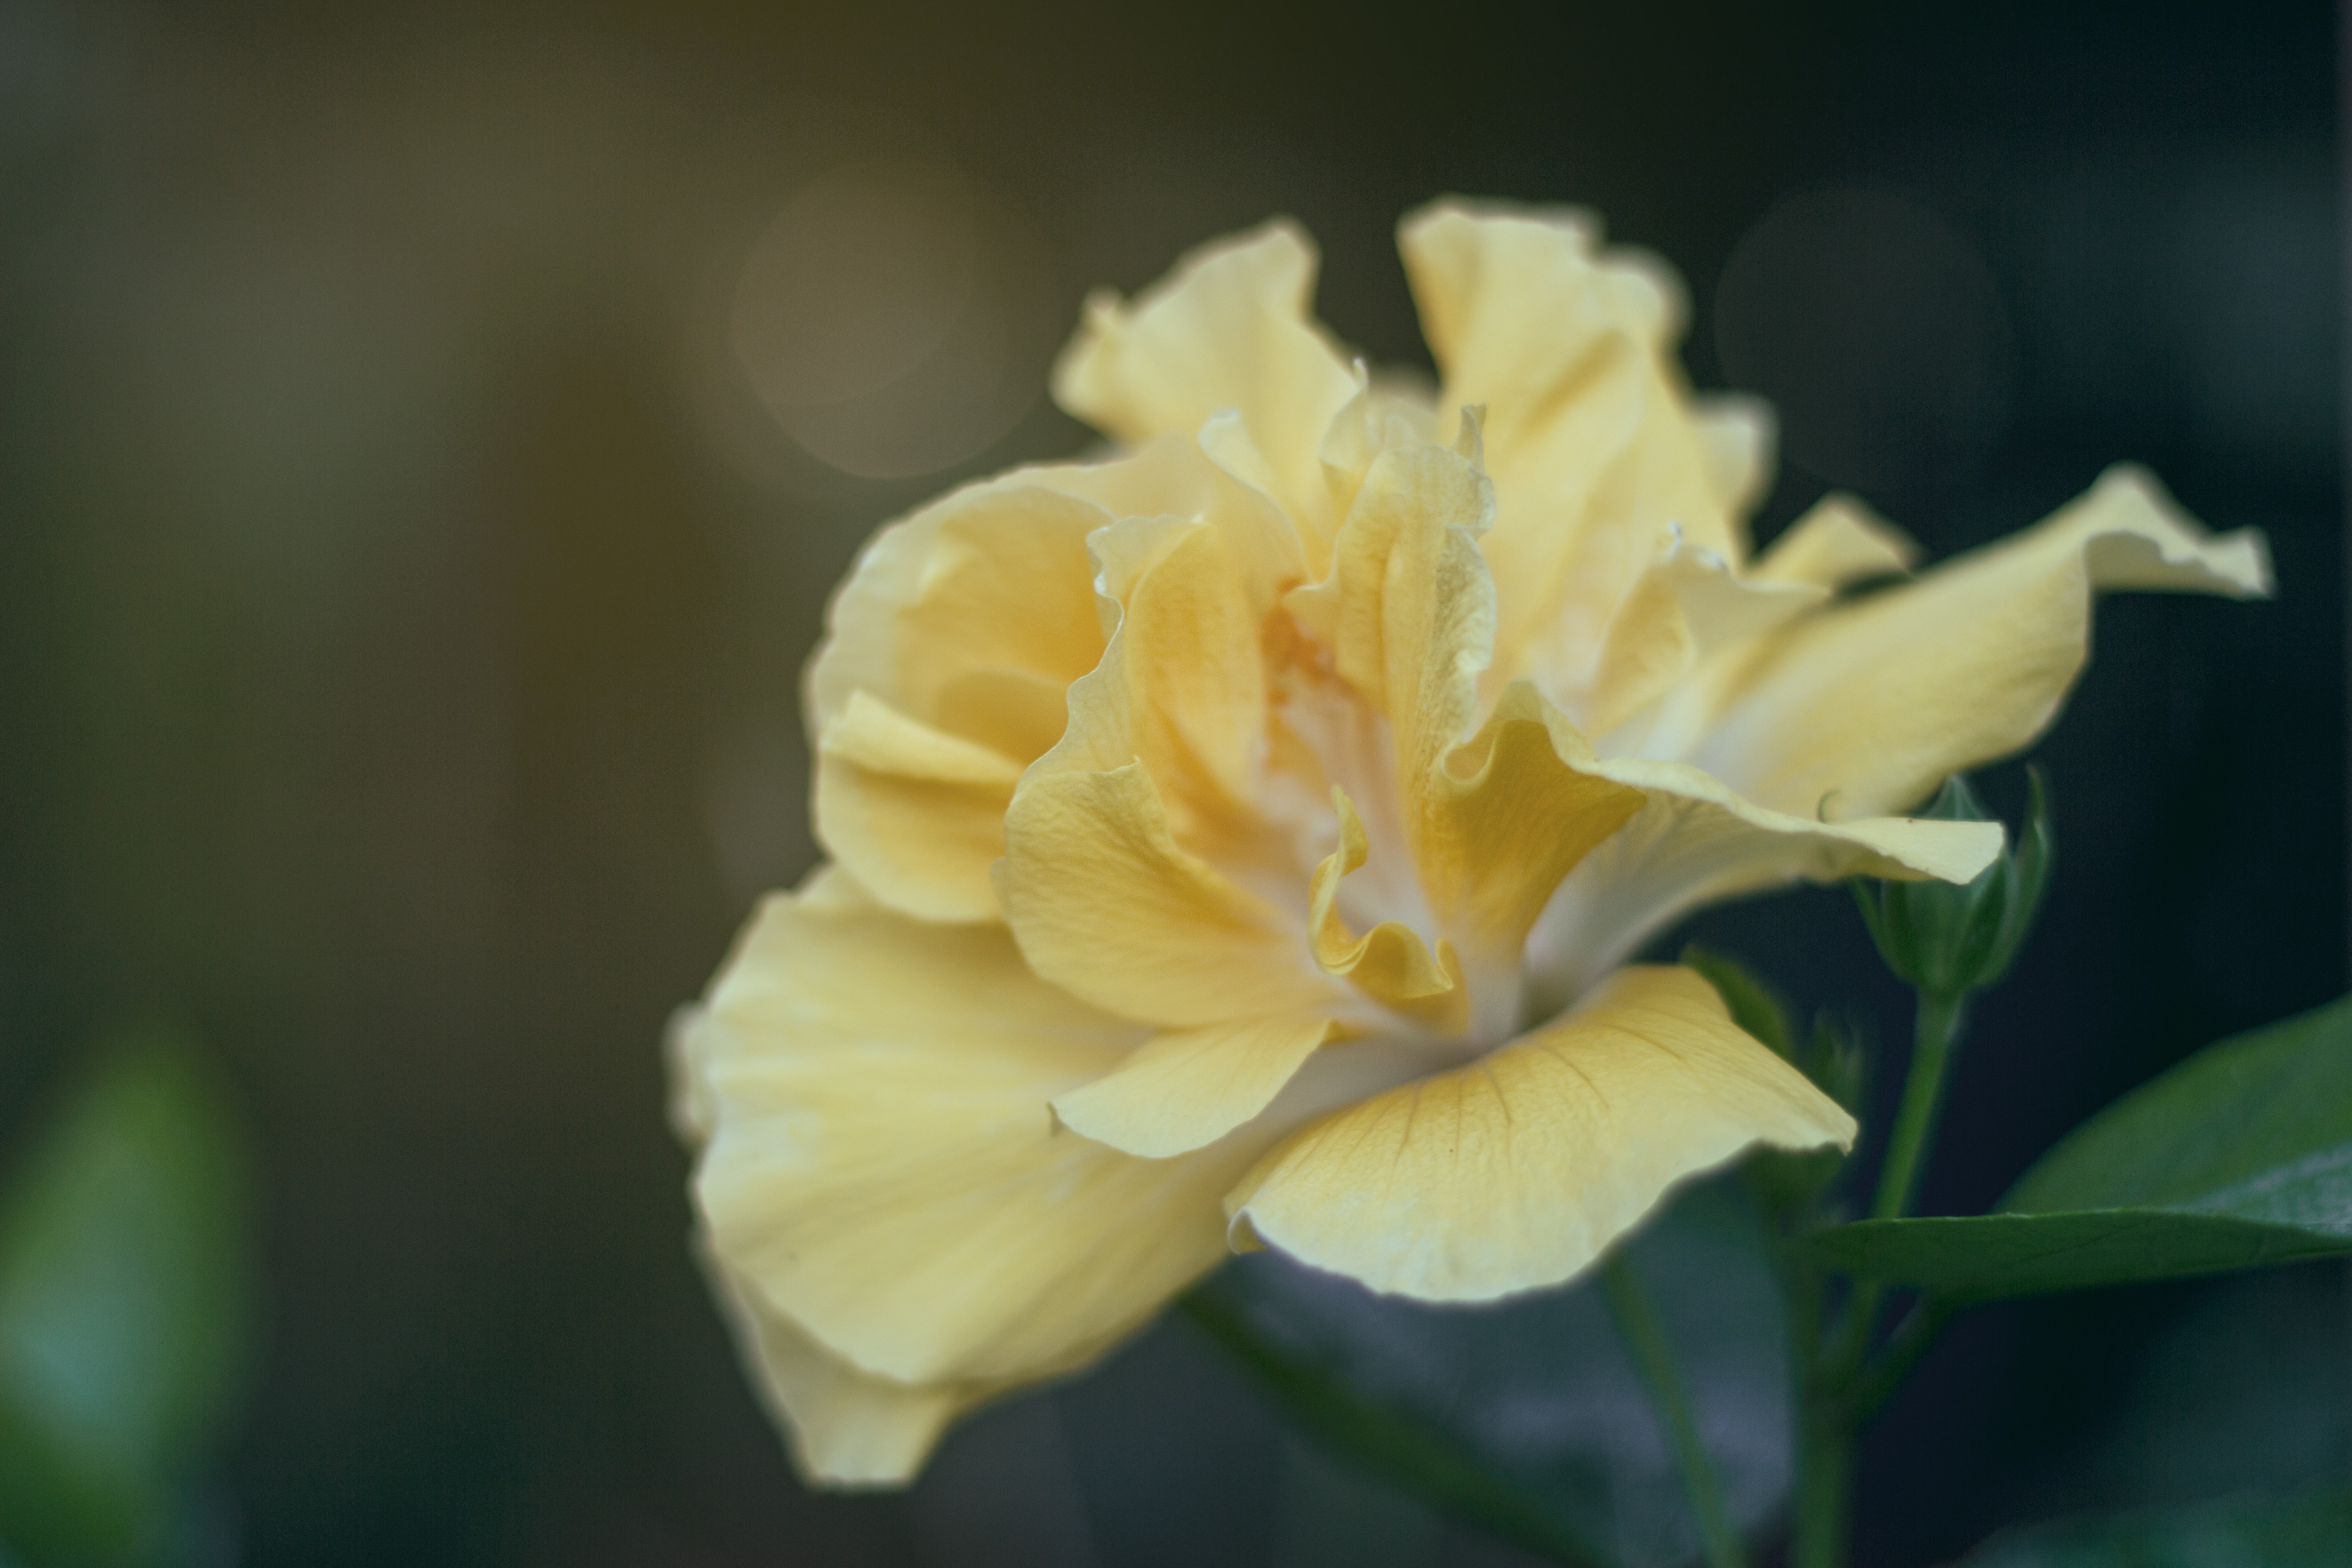 shallow photography of yellow flower